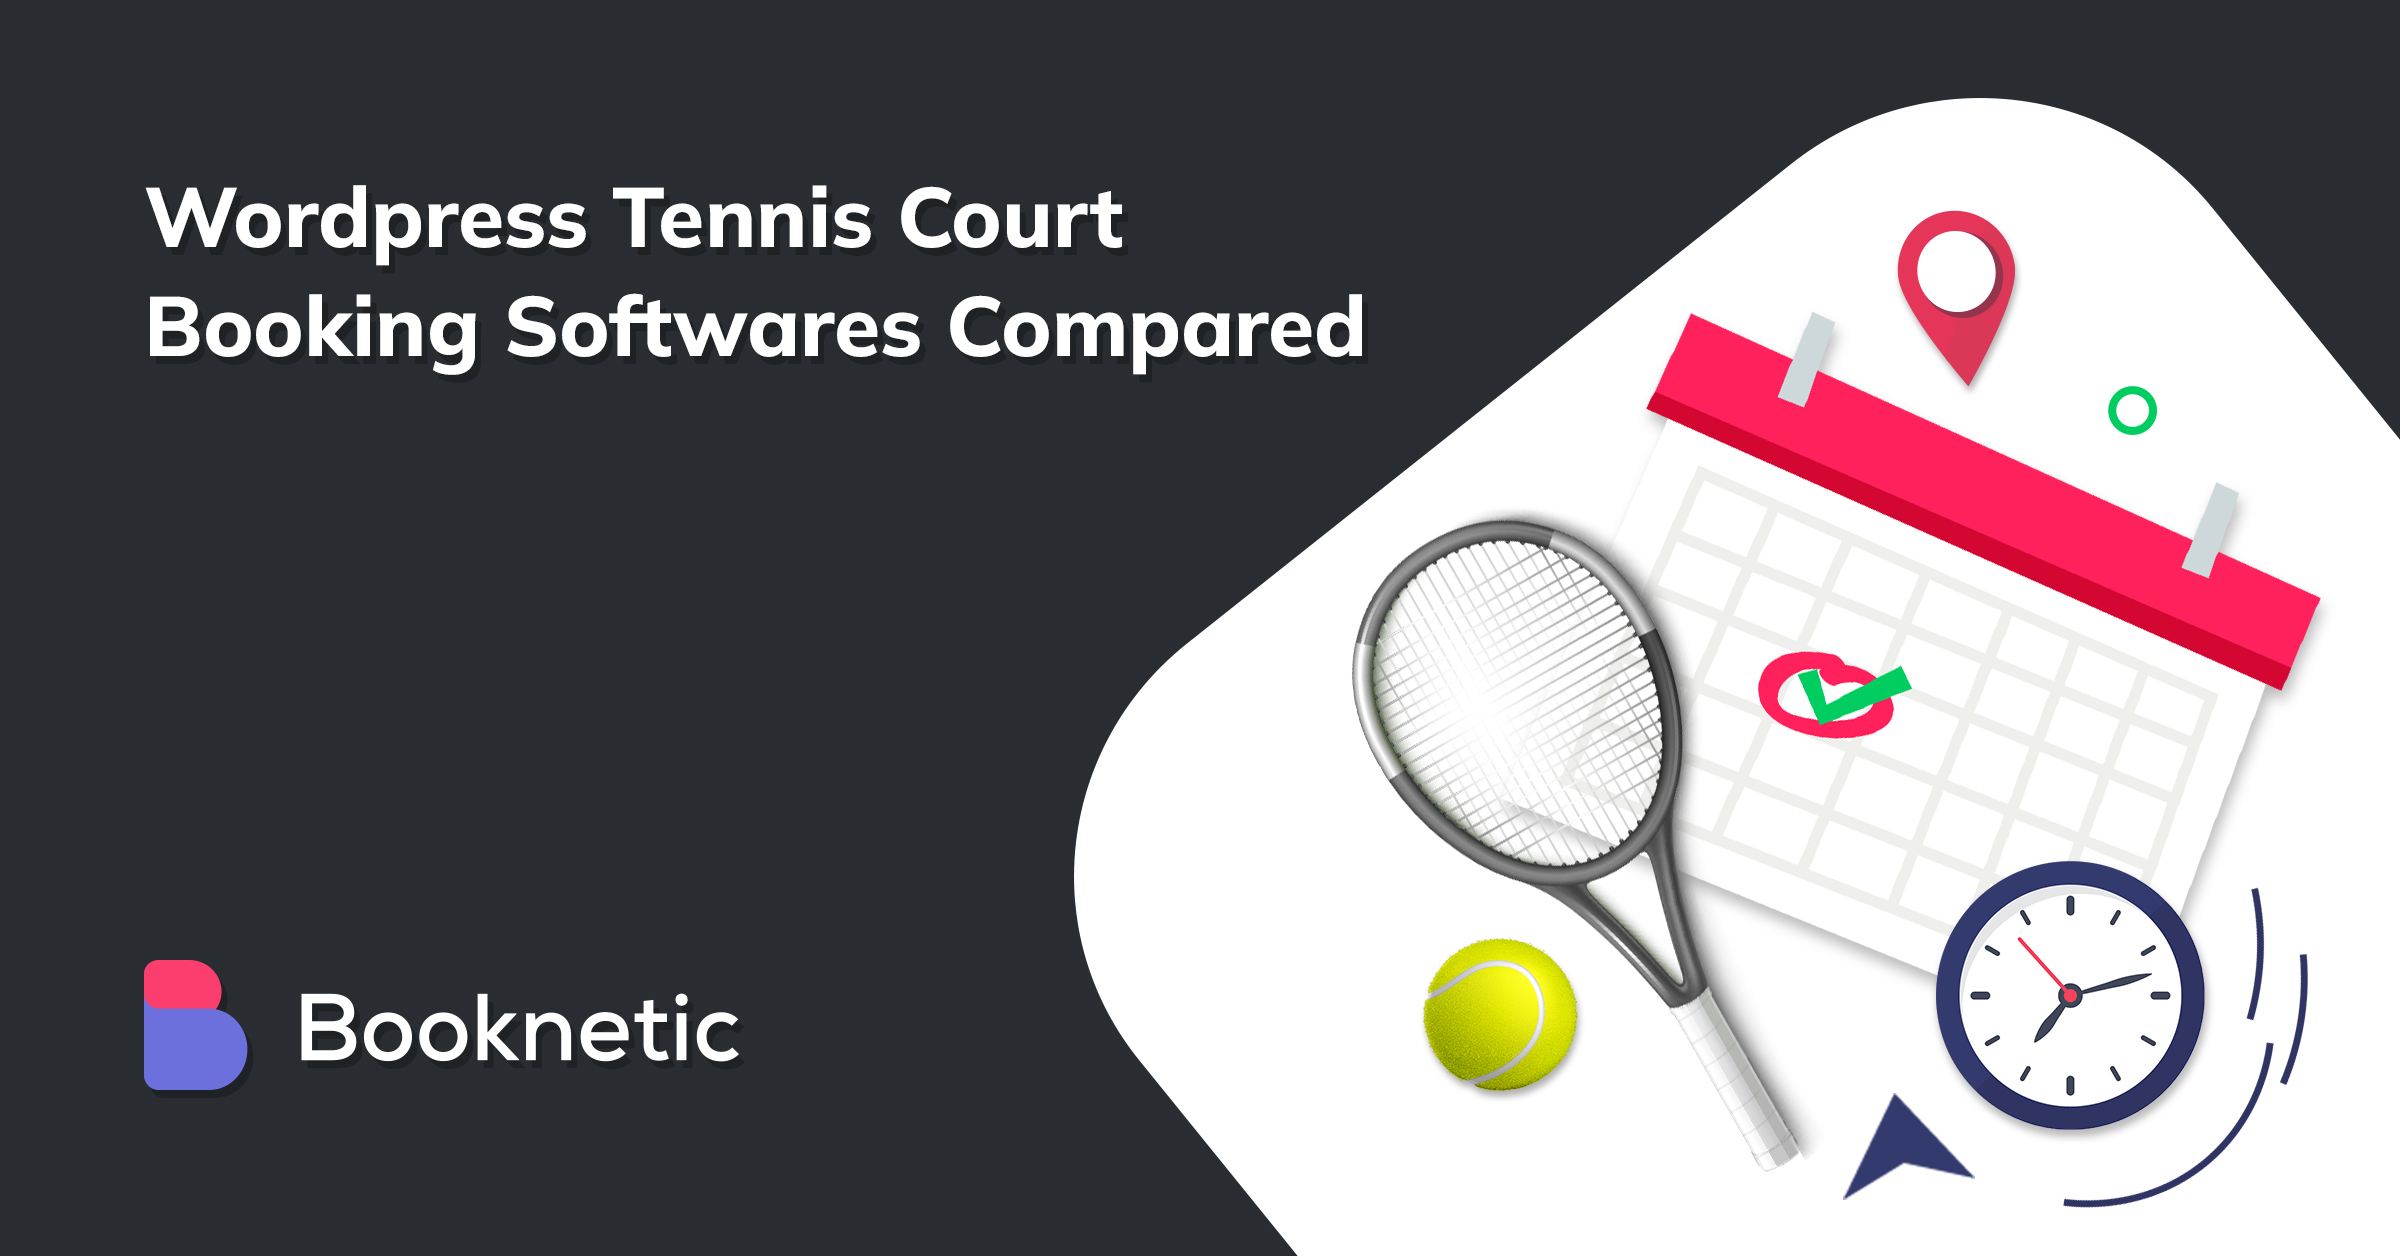 WordPress Tennis Court Booking Softwares Compared - 2022